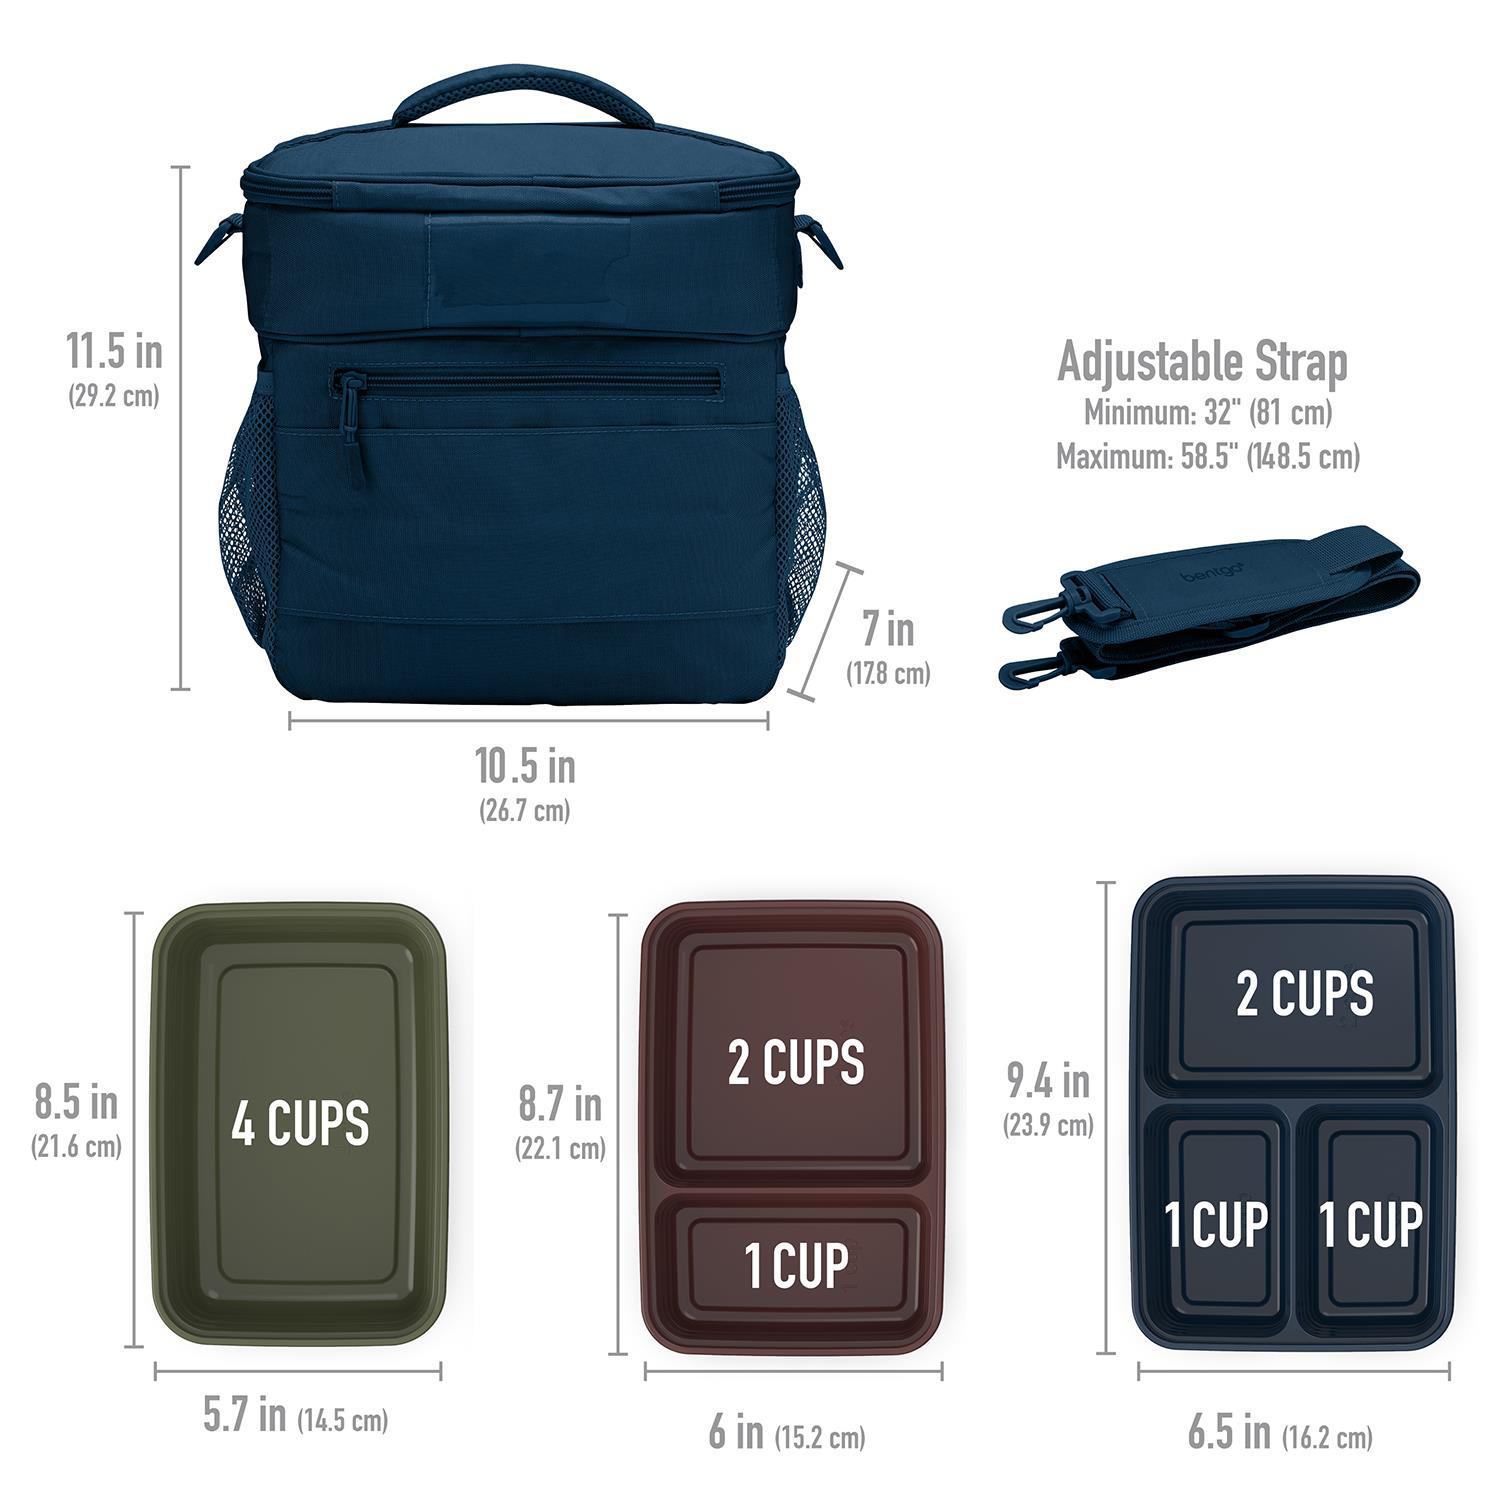 https://bigbigmart.com/wp-content/uploads/2022/07/Bentgo%C2%AE-Prep-Deluxe-Multimeal-Bag-Premium-Insulation-up-to-8-Hrs-with-Water-Resistant-Exterior-Interior-Extra-Large-Lunch-Bag-Holds-4-Meals-Snacks-Great-for-All-Day-Meal-Prep-Navy-Blue4.jpg